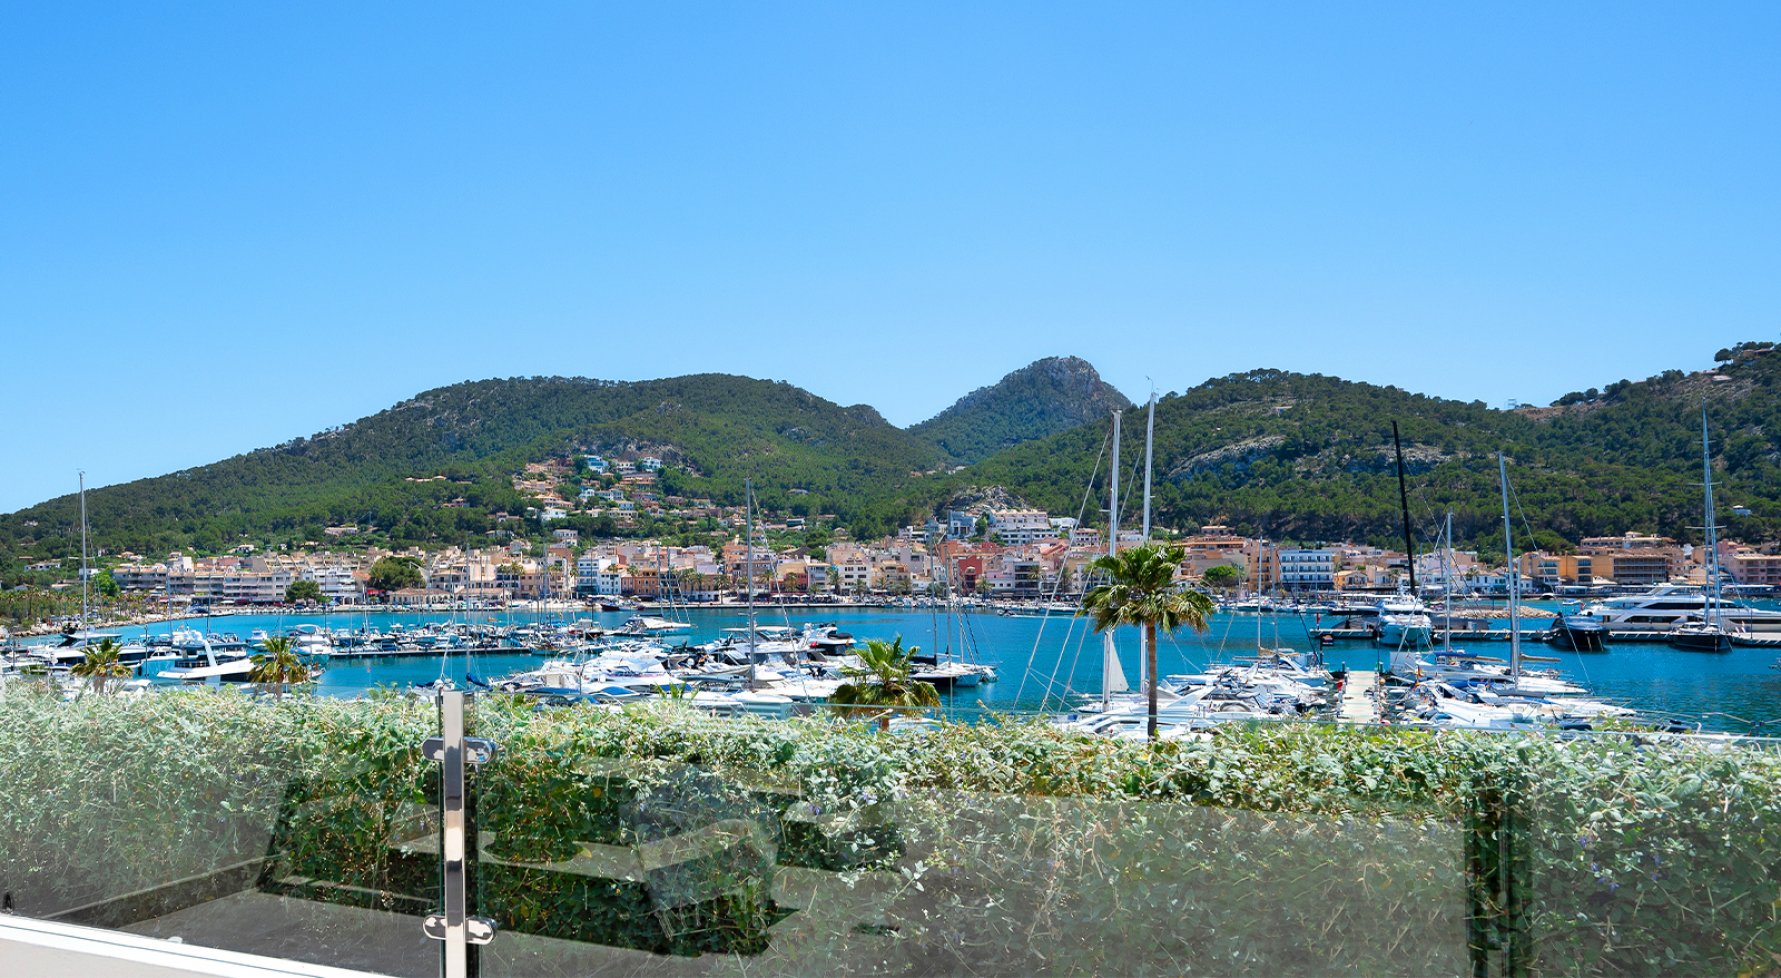 Property in 07157 Mallorca - Port d'Andratx: Luxurious penthouse with breathtaking harbor views in Puerto Andratx - picture 1